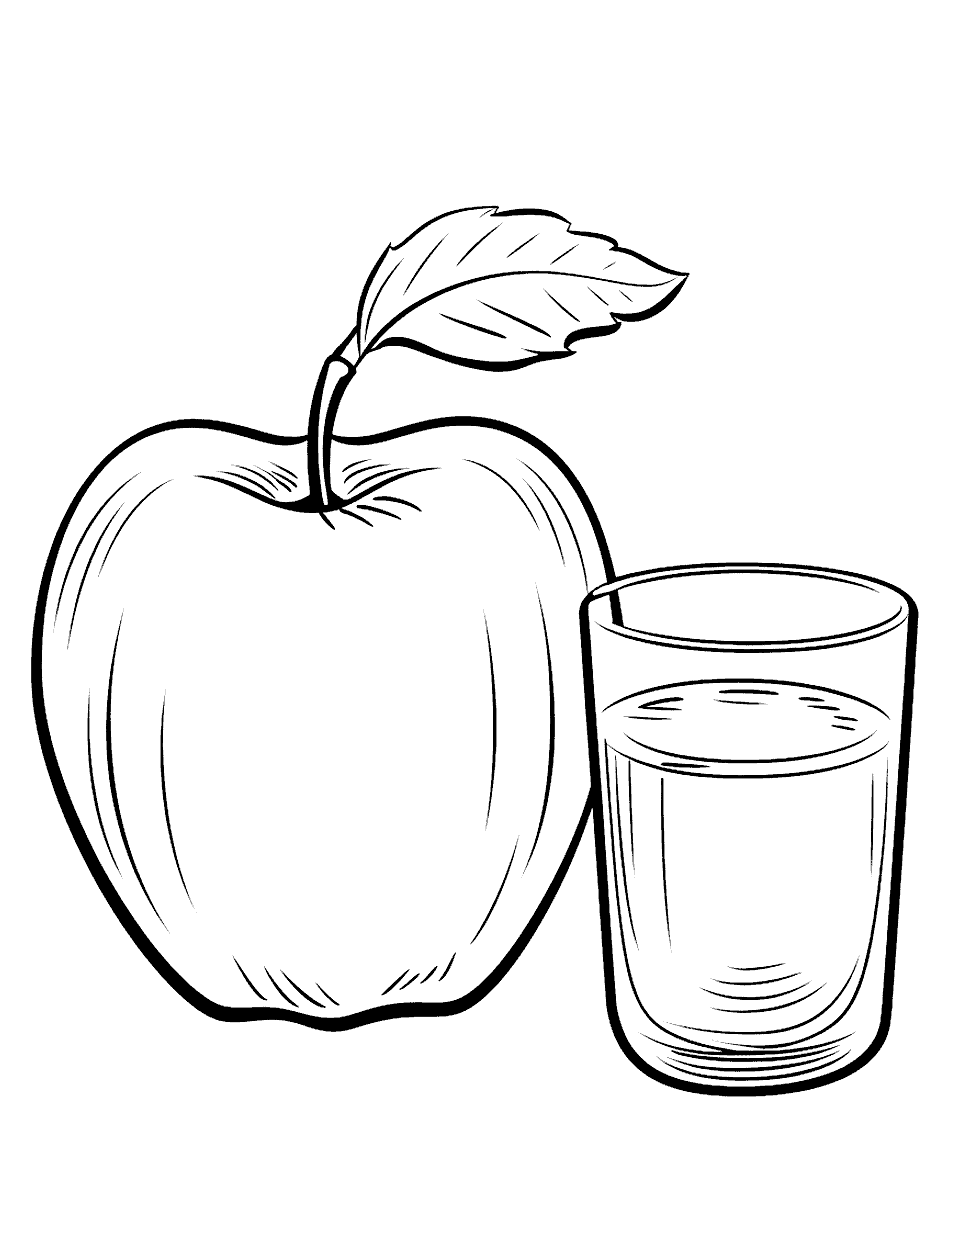 Apple and a Glass of Juice Coloring Page - An apple next to a refreshing glass of apple juice.